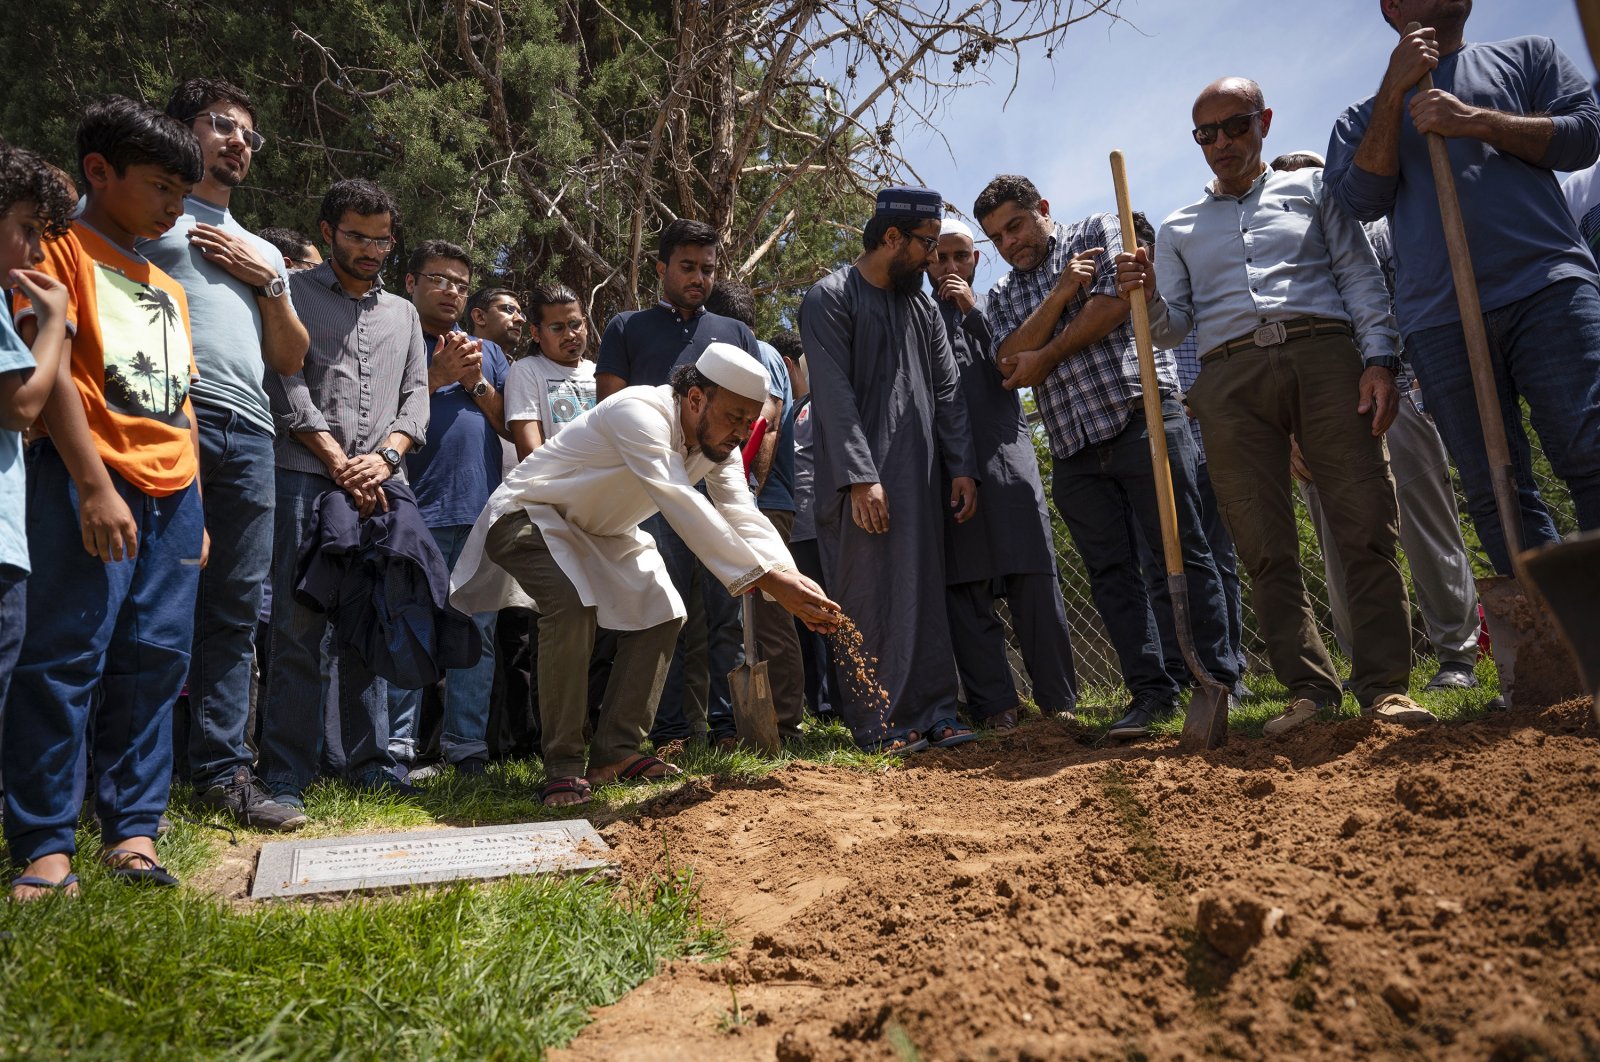 People sprinkle dirt over the grave of Muhammad Afzaal Hussain, 27, at Fairview Memorial Park in Albuquerque, New Mexico, U.S., Aug. 5, 2022. (Chancey Bush/The Albuquerque Journal via AP)